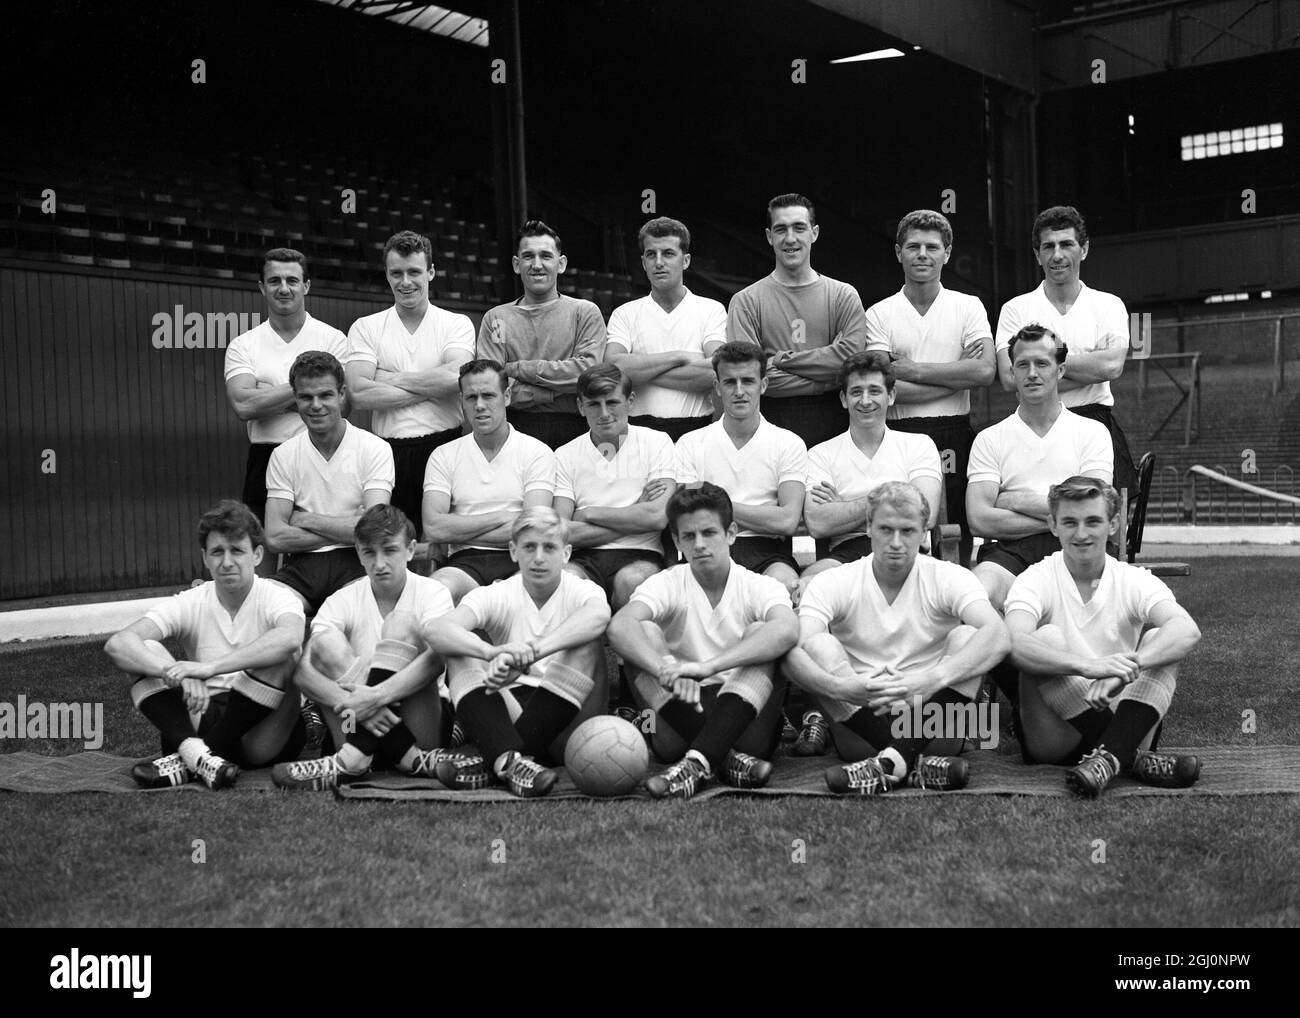 official group of Derby County FC 1961-62 Back row left to right: Jack Parry ; Peter Thompson ; Ken Oxford ; Ray Young ; Terry Adlington ; Brian Daykin ; Des Palmer Centre row: L to R : E Hutchinson , G Barrowcliffe ; Phil Waller ; Glyn Davies ; W Curry , A Conwell . Front row L to R: Roby ; Geoff Campion ; G Stephenson ; Ron Webster ; Nick Hopkinson ; John Richardson 18th August 1961 Stock Photo